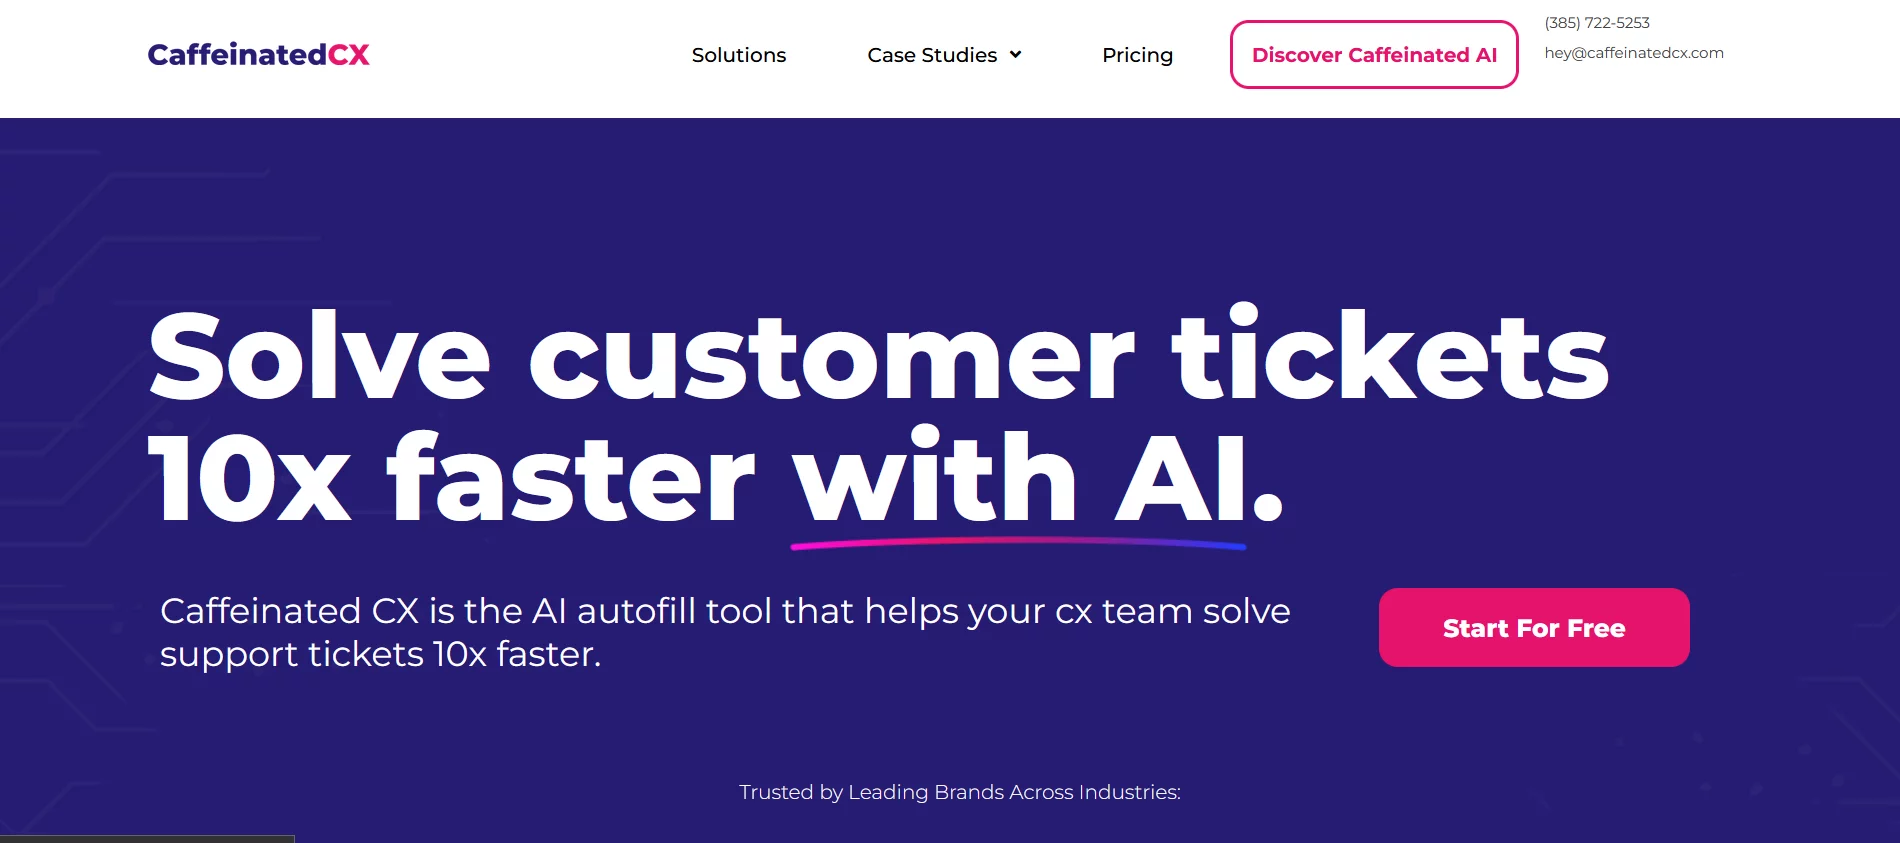  Solve customer tickets 10x faster with AI.